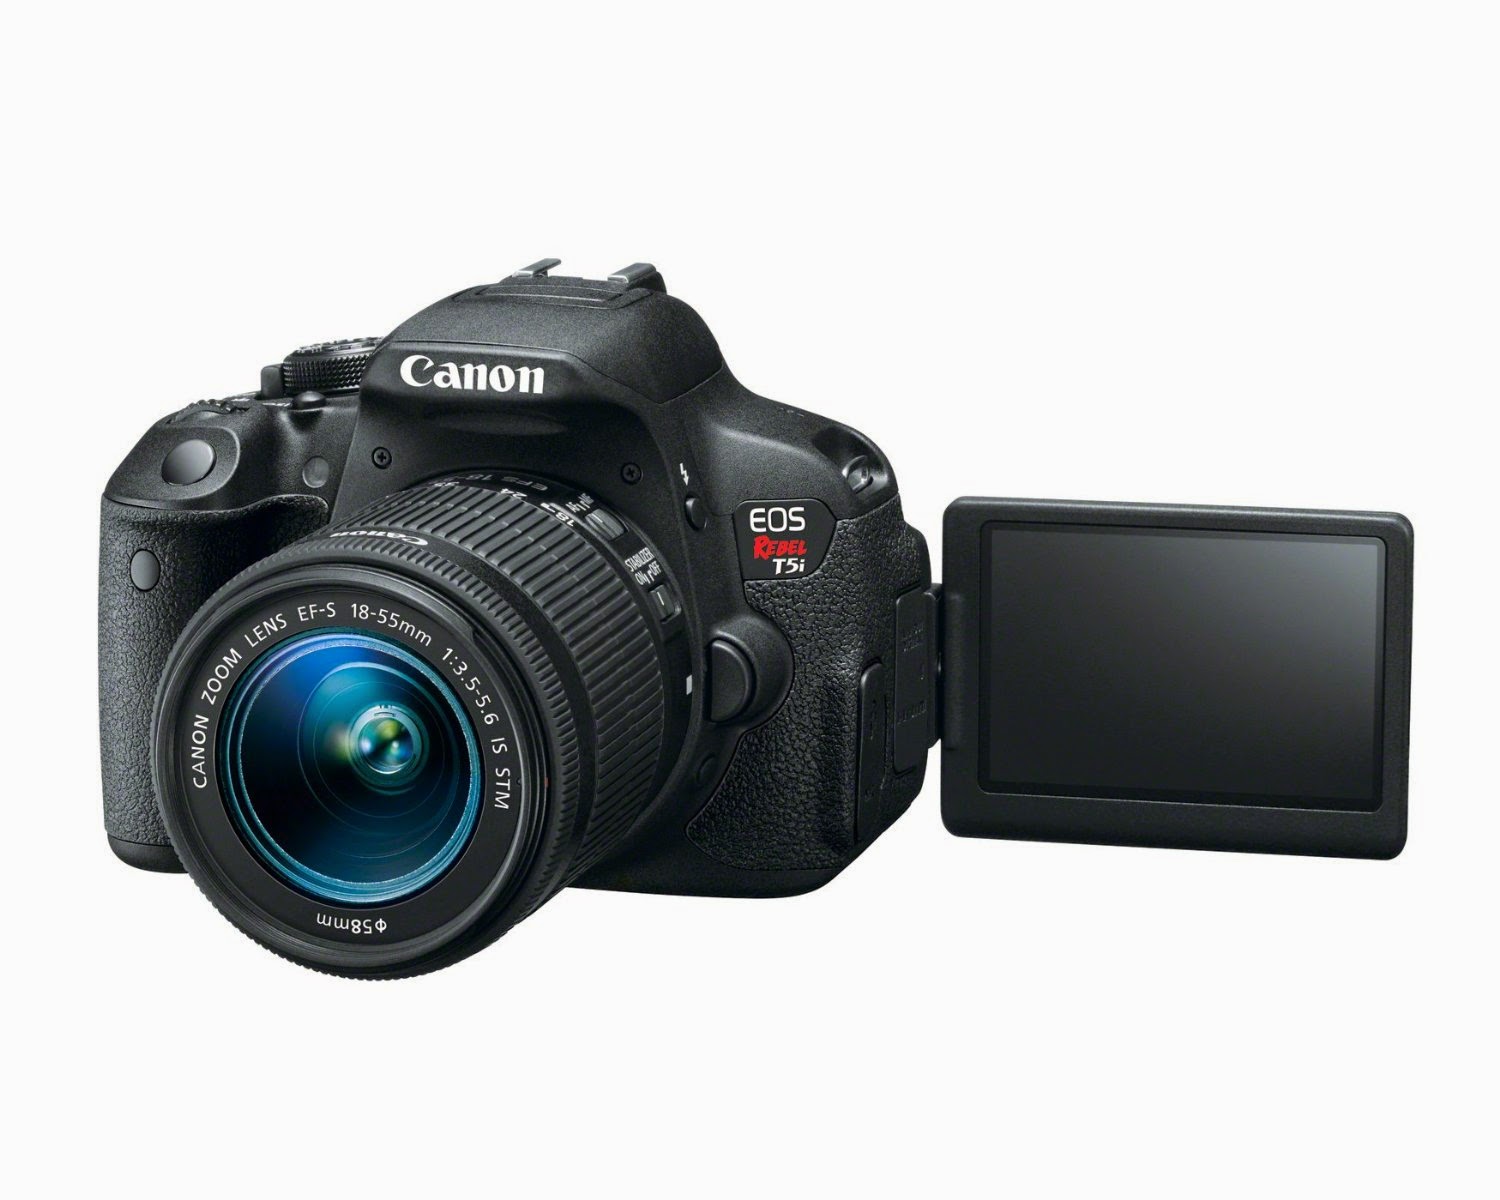 Canon EOS Rebel T5i Digital SLR Camera with Vari-angle touch screen